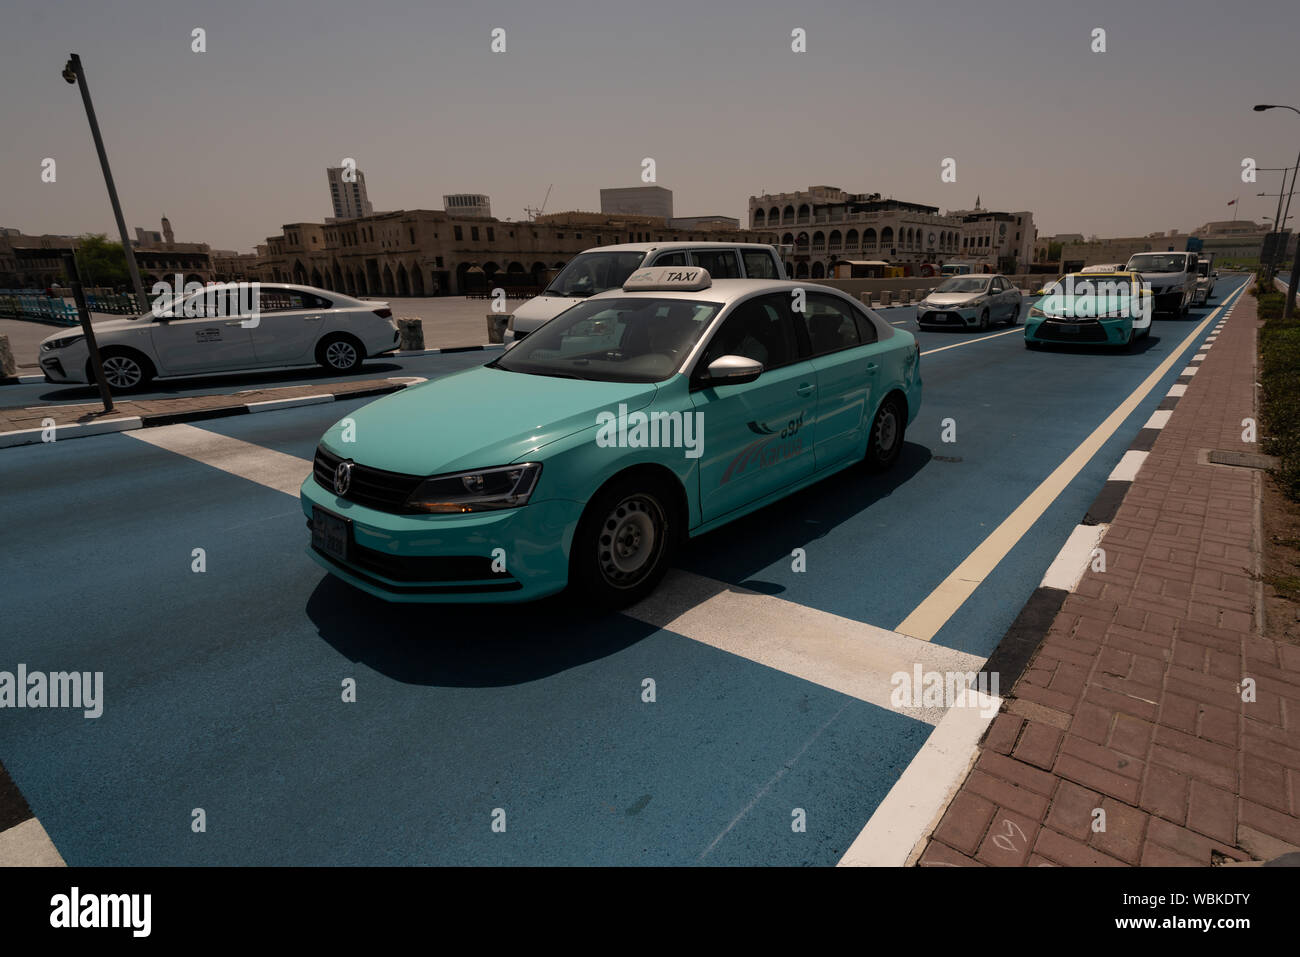 The Public Works Authority in Qatar (Ashghal) has implemented a pilot 'cool pavement' project in the capital, Doha, which involves the use of a cryogenic material to reduce the temperature of the asphalt on roads. Unlike conventional asphalt, which contributes to increased temperatures by absorbing up to 95 percent of sunlight, the 'cool pavement' reflects UV rays and absorbs solar radiation to a lesser extent, thereby contributing to overall temperature reduction. Ashghal says the project will last for 18 months and based on the outcome of the pilot, it will determine its wider applications. Stock Photo